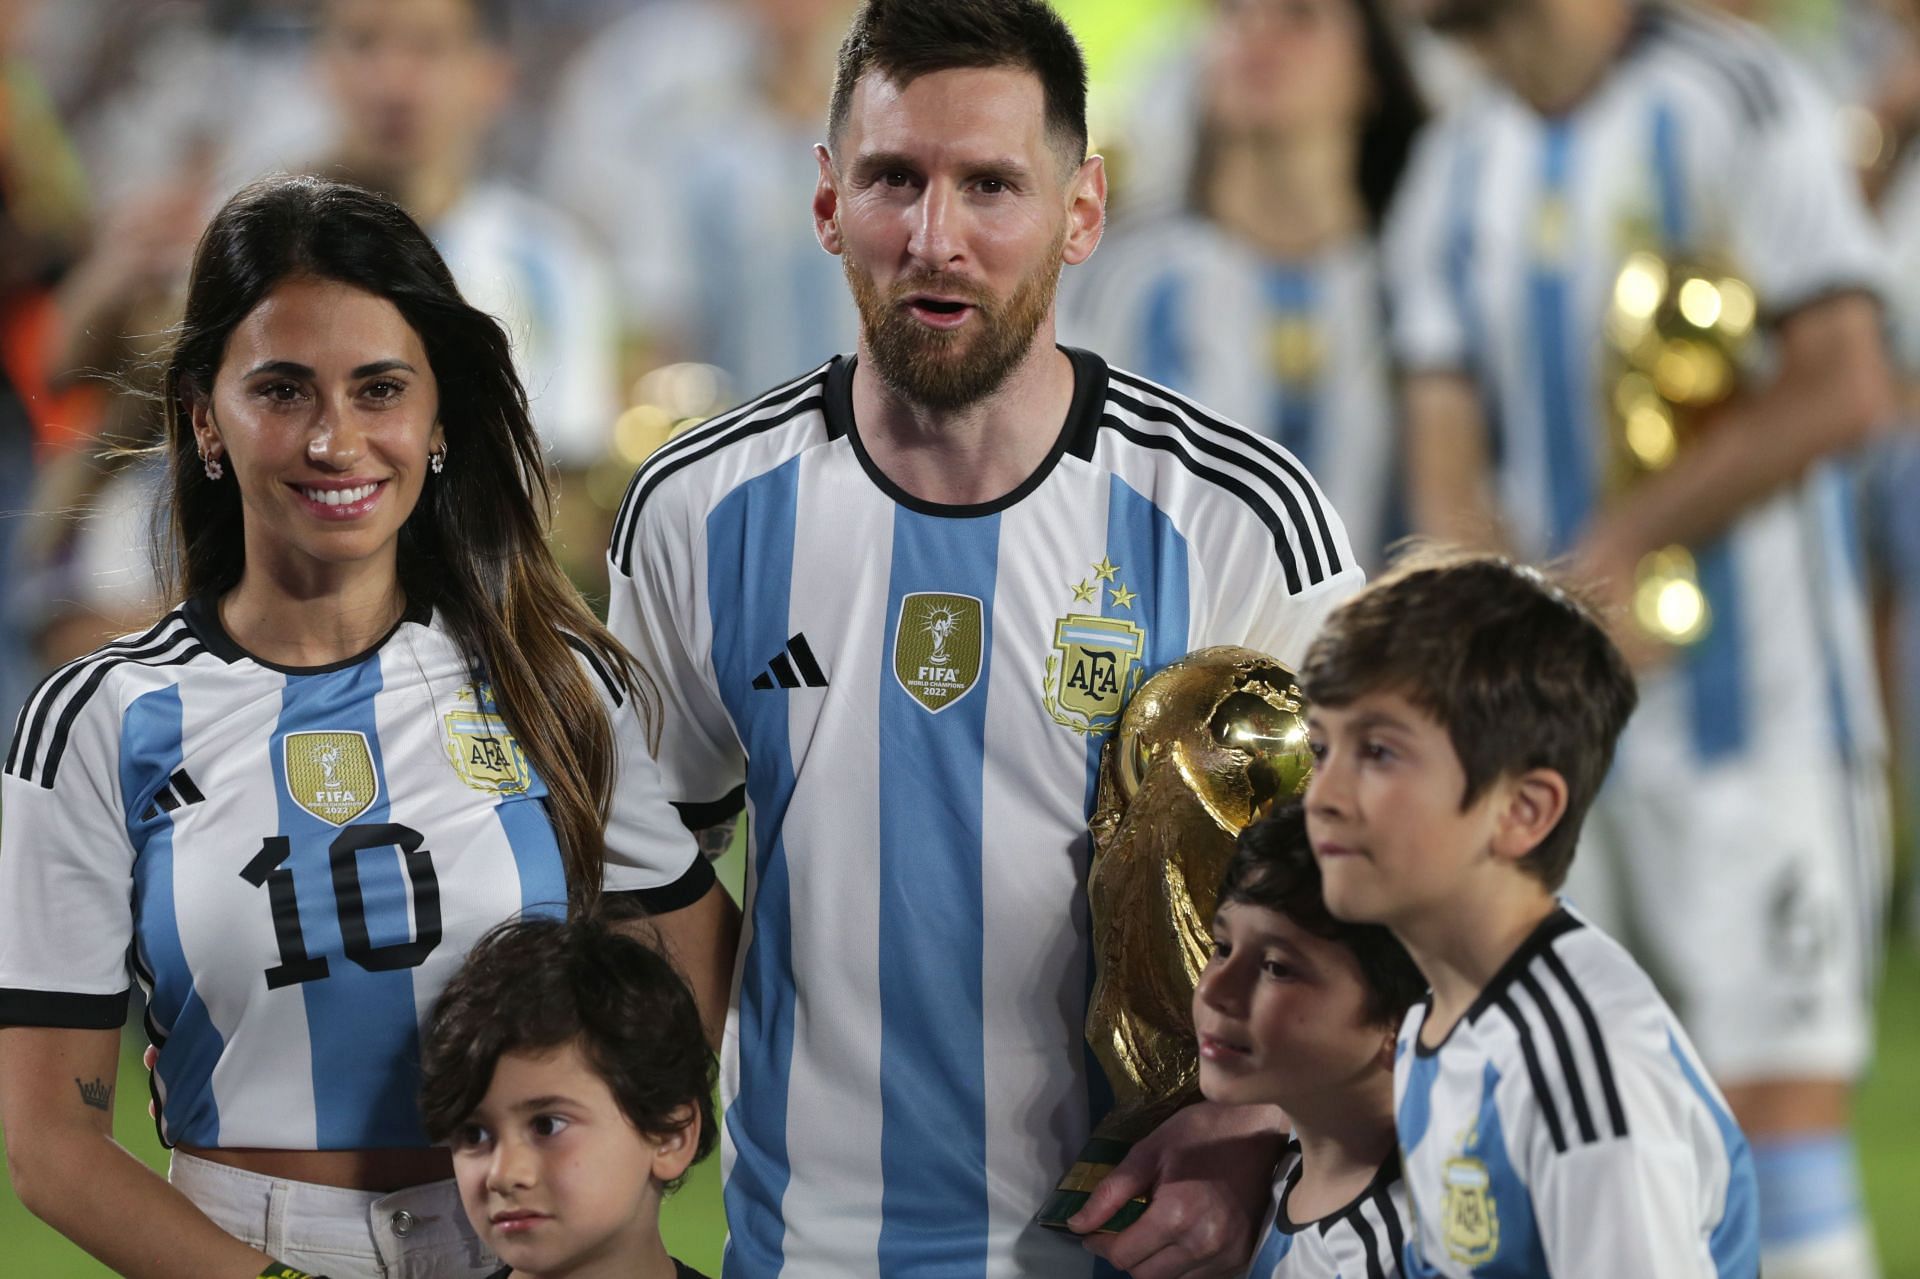 Antonella Roccuzzo (left) appears to be pushing for Messi to return to Barca.